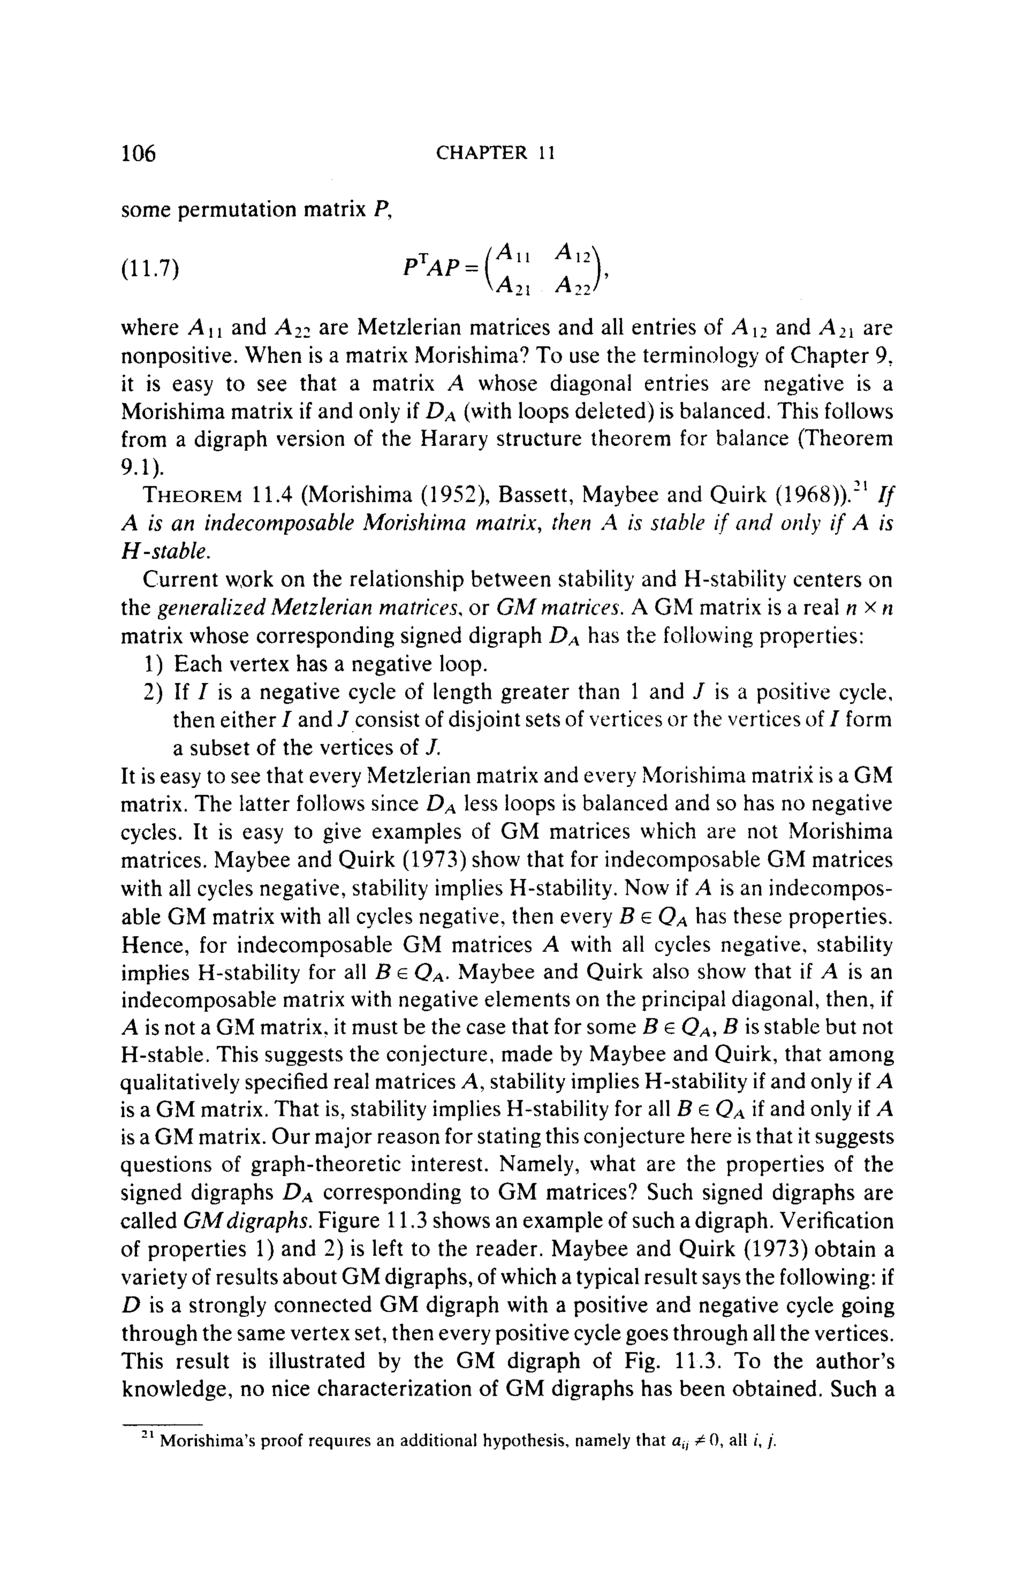 106 CHAPTER 11 some permutation matrix P, (11.7) PTAP = (Au` A 12v Al t A 22) ' where A 11 and A are Metzlerian matrices and all entries of A l2 and A 21 are nonpositive. When is a matrix Morishima?